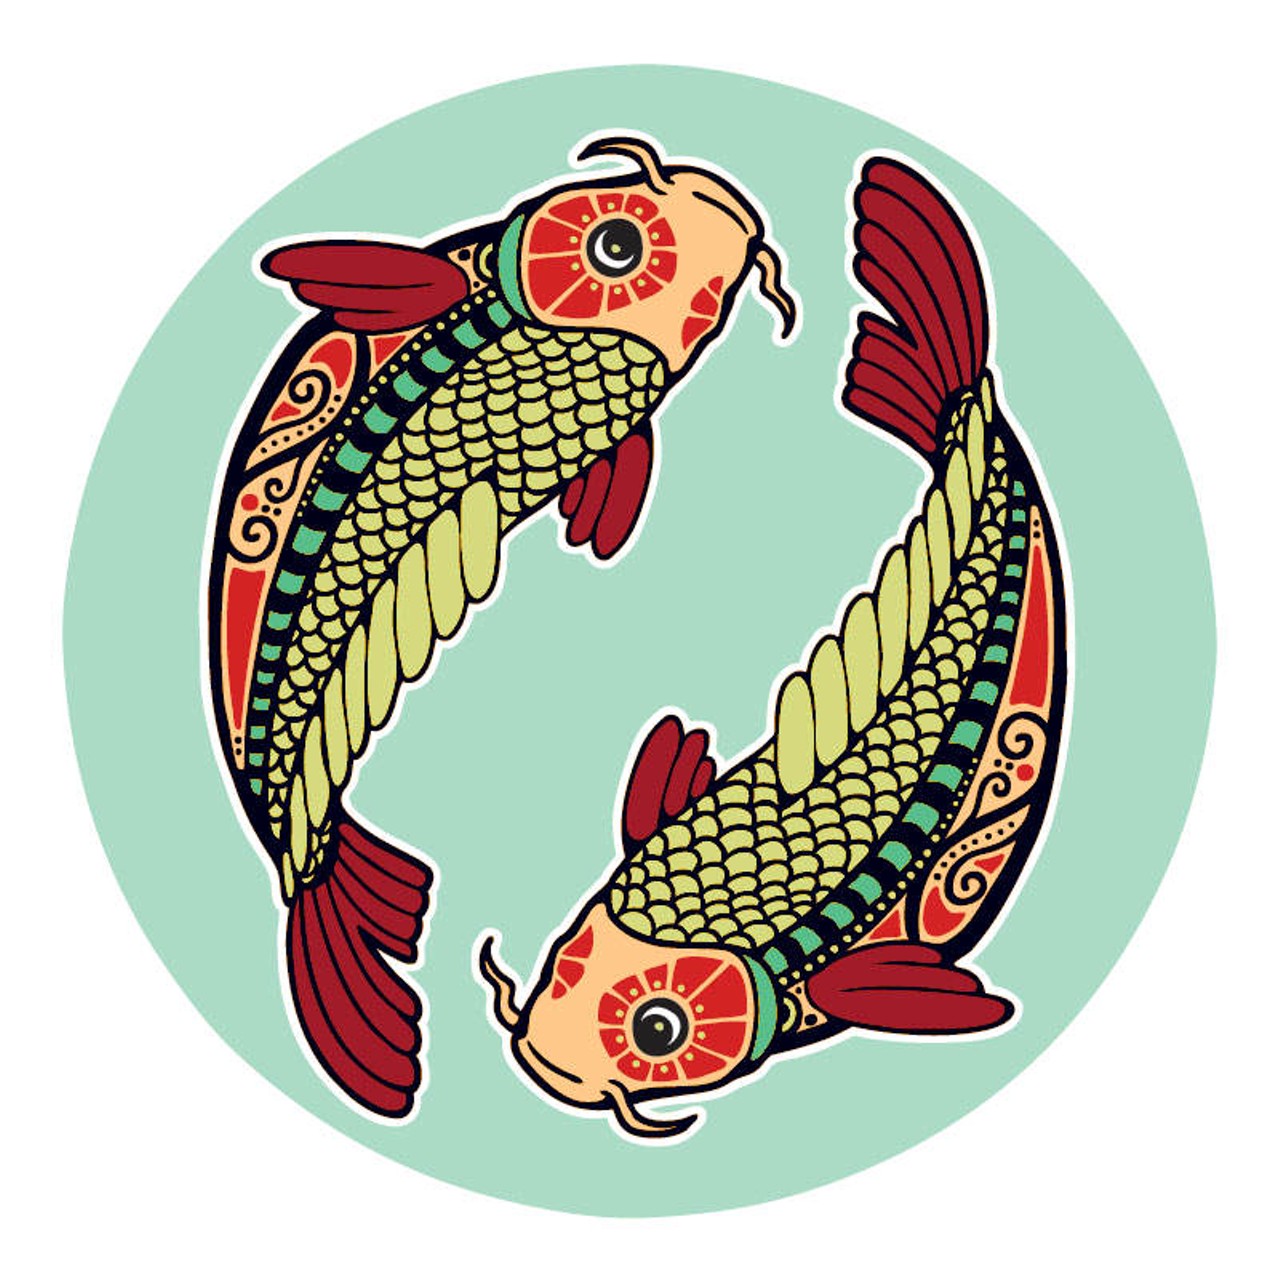 PISCES&nbsp;(Feb. 21-March 20):
After a period of frustration, you are looking at getting back to square one. Relative to a person or a situation, your life is moving onto a whole new track, with a very different set of conditions in play. While the deeper part of you is more than ready for this, your ego has issues with the idea that you have no clue how everything will unfold. Between now and Christmas you need to understand that whatever's coming to pass has already been written. This is where the sidewalk ends. Keep that in mind, stay in the moment, and don't make the mistake of trying to push the river.